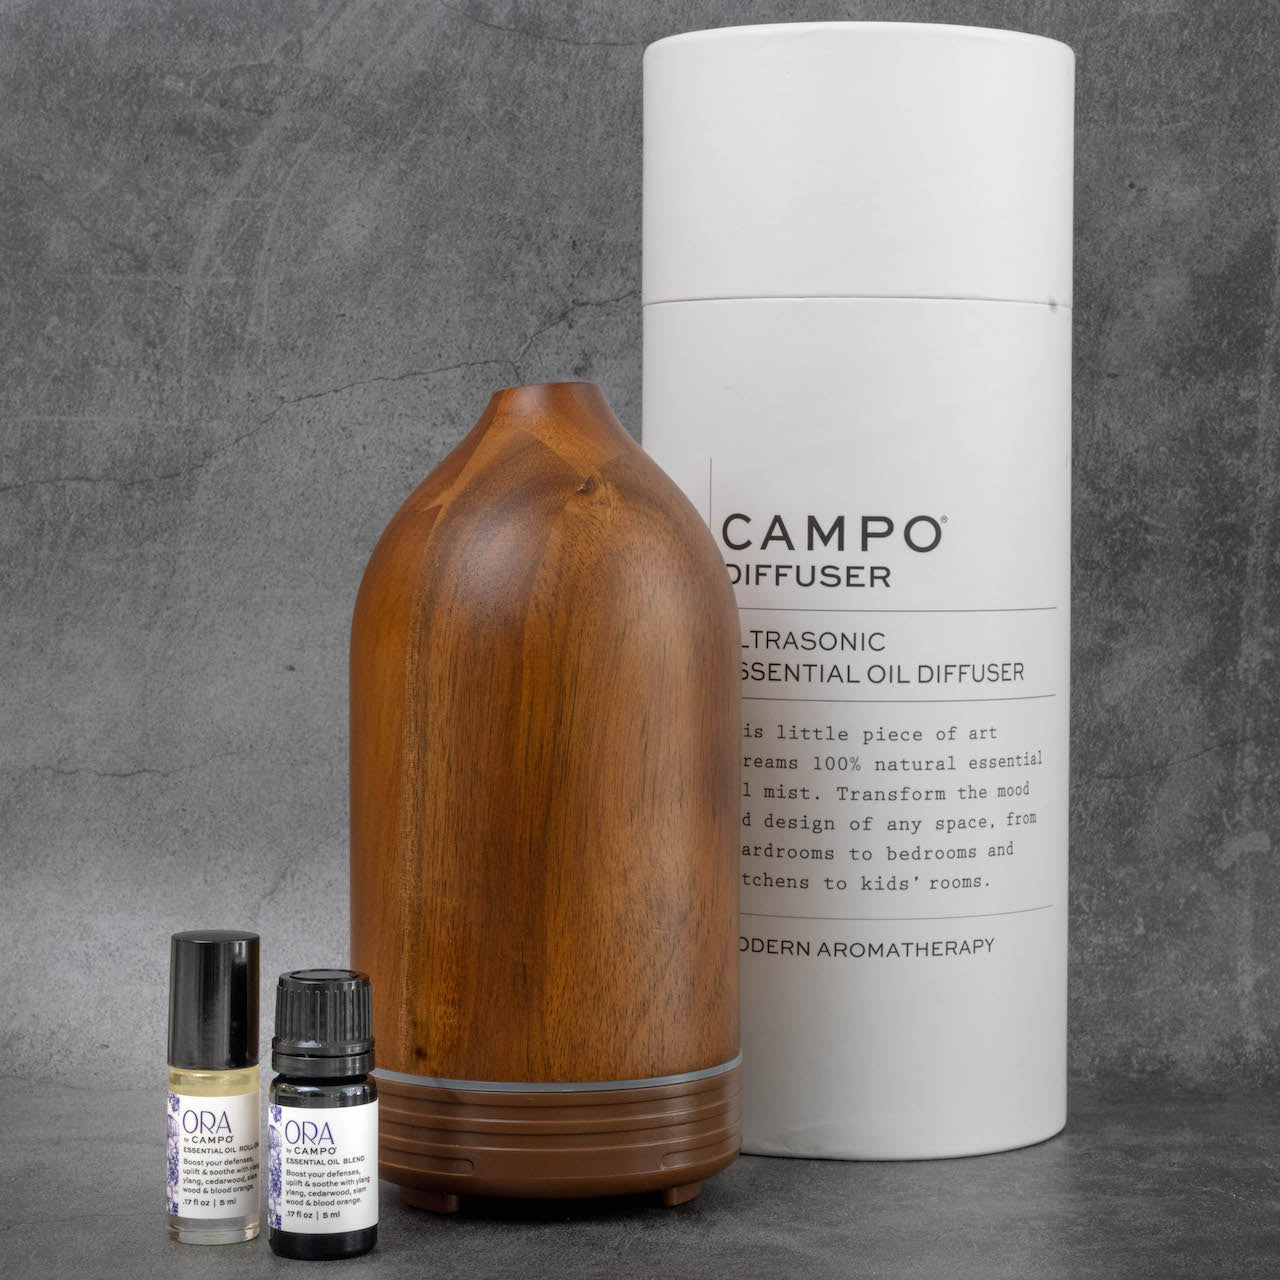 The same wooden diffuser as in the previous picture, with a set of ORA by Campo essential oils next to it. Behind the diffuser is the packaging for the diffuser, a tall white cylinder reading "Campo Diffuser, Ultrasonic Essential Oil Diffuser".